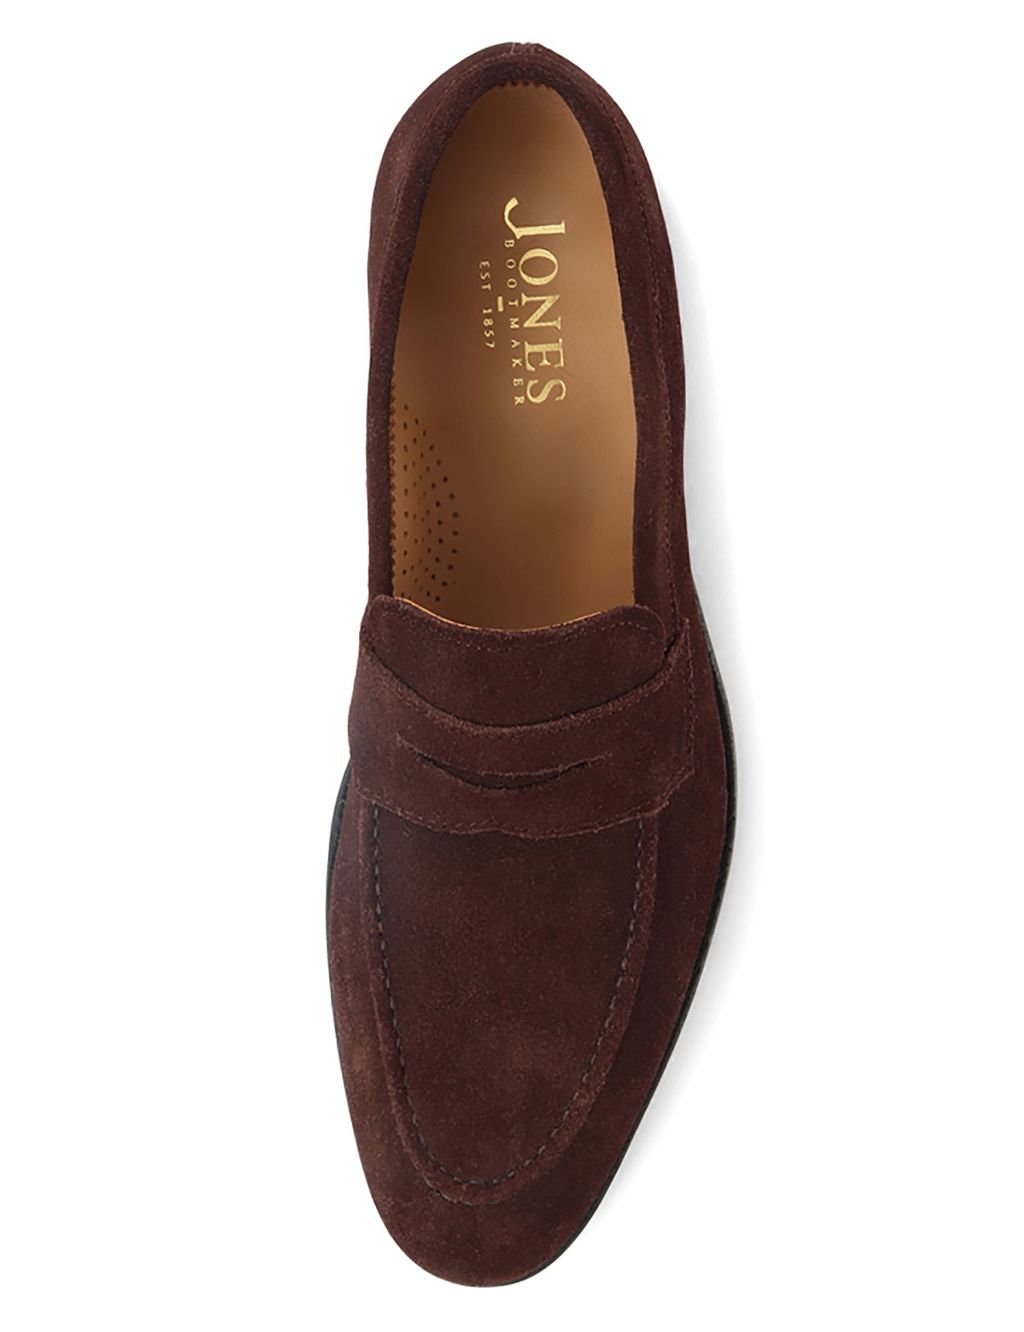 Leather Goodyear Welted Slip-On Loafers image 3